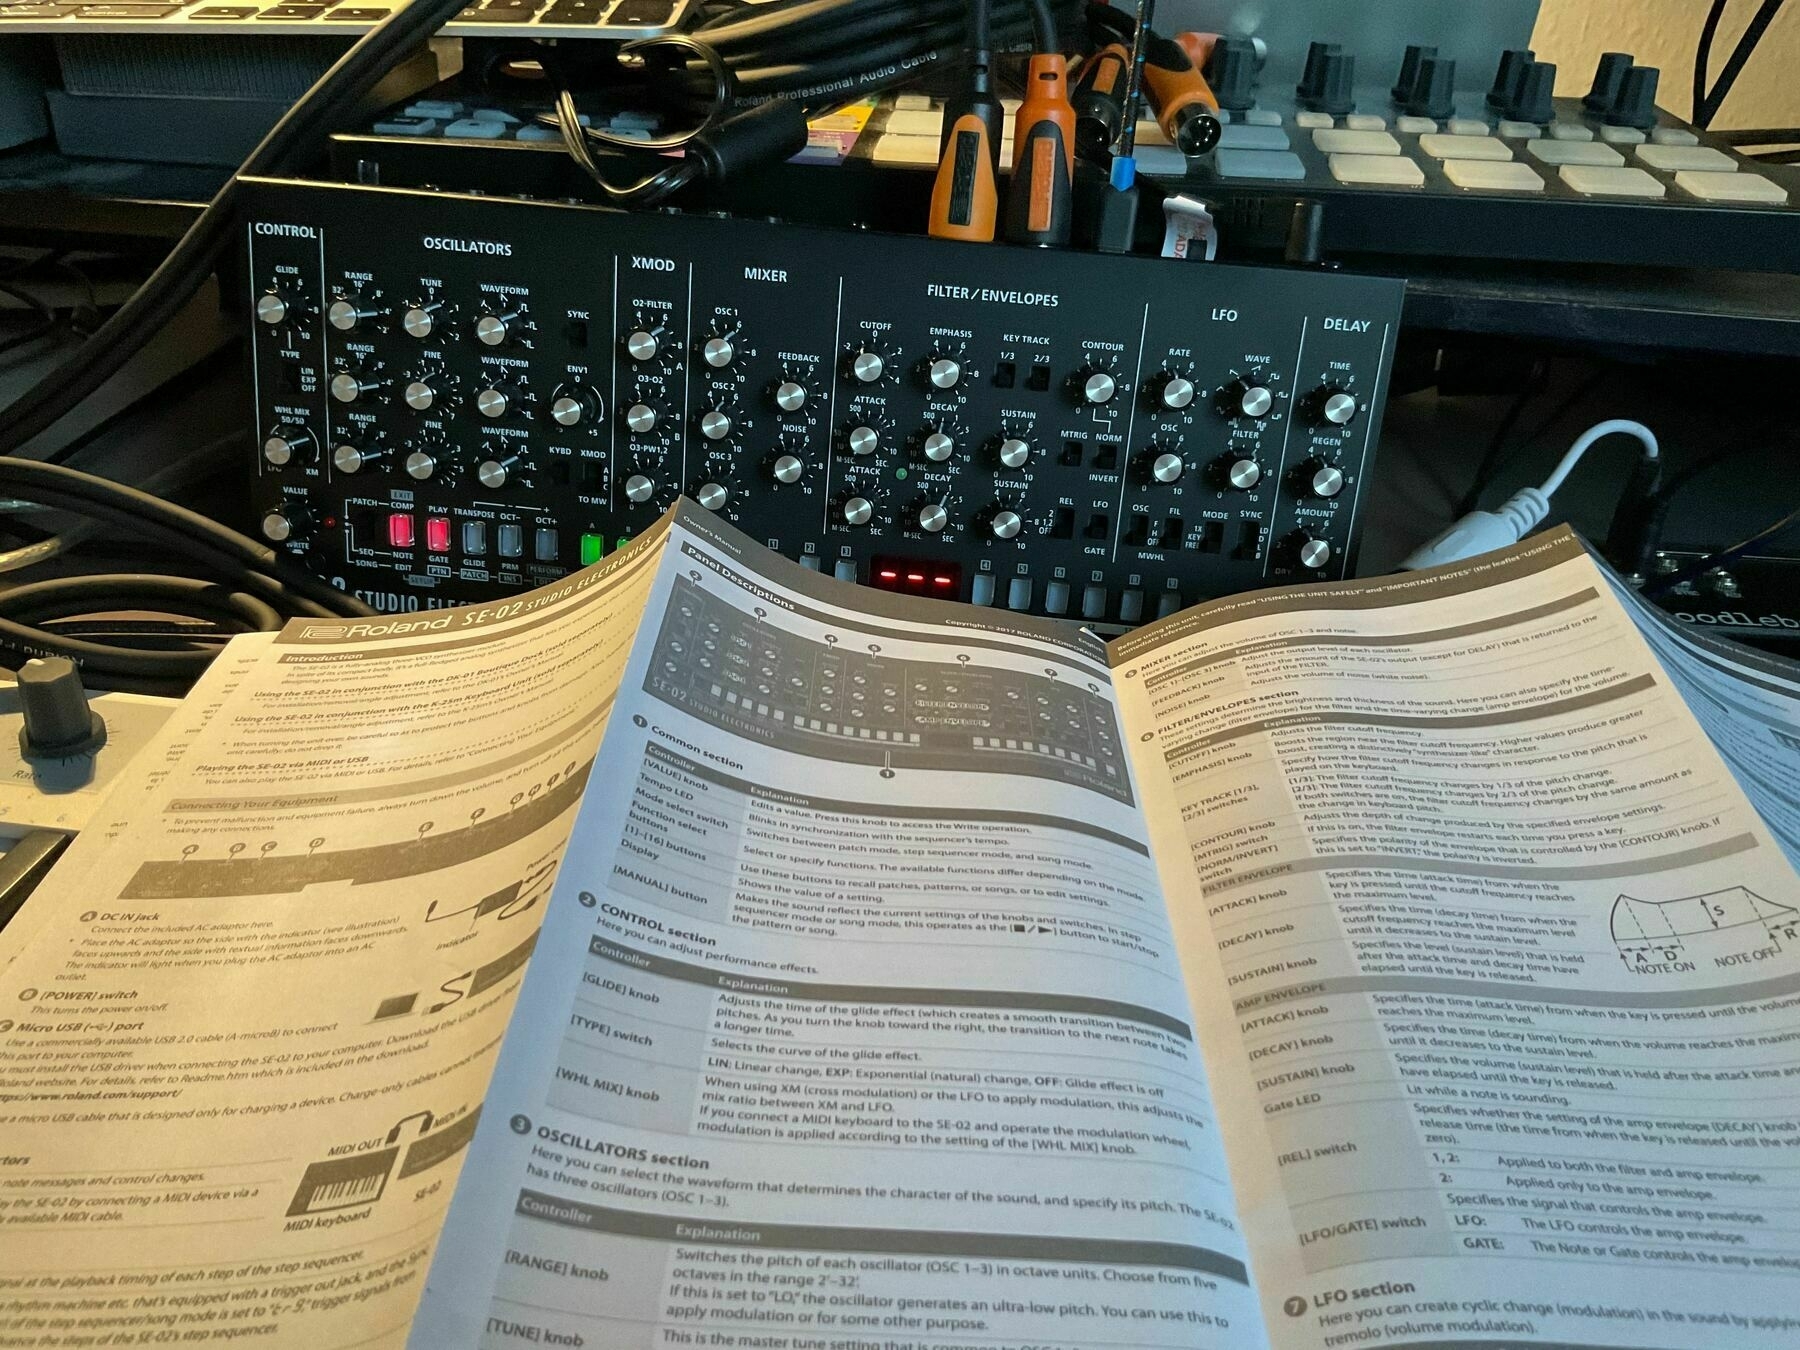 A Roland SE 02 synth  sitting on a cluttered desk behind a one page instruction manual.